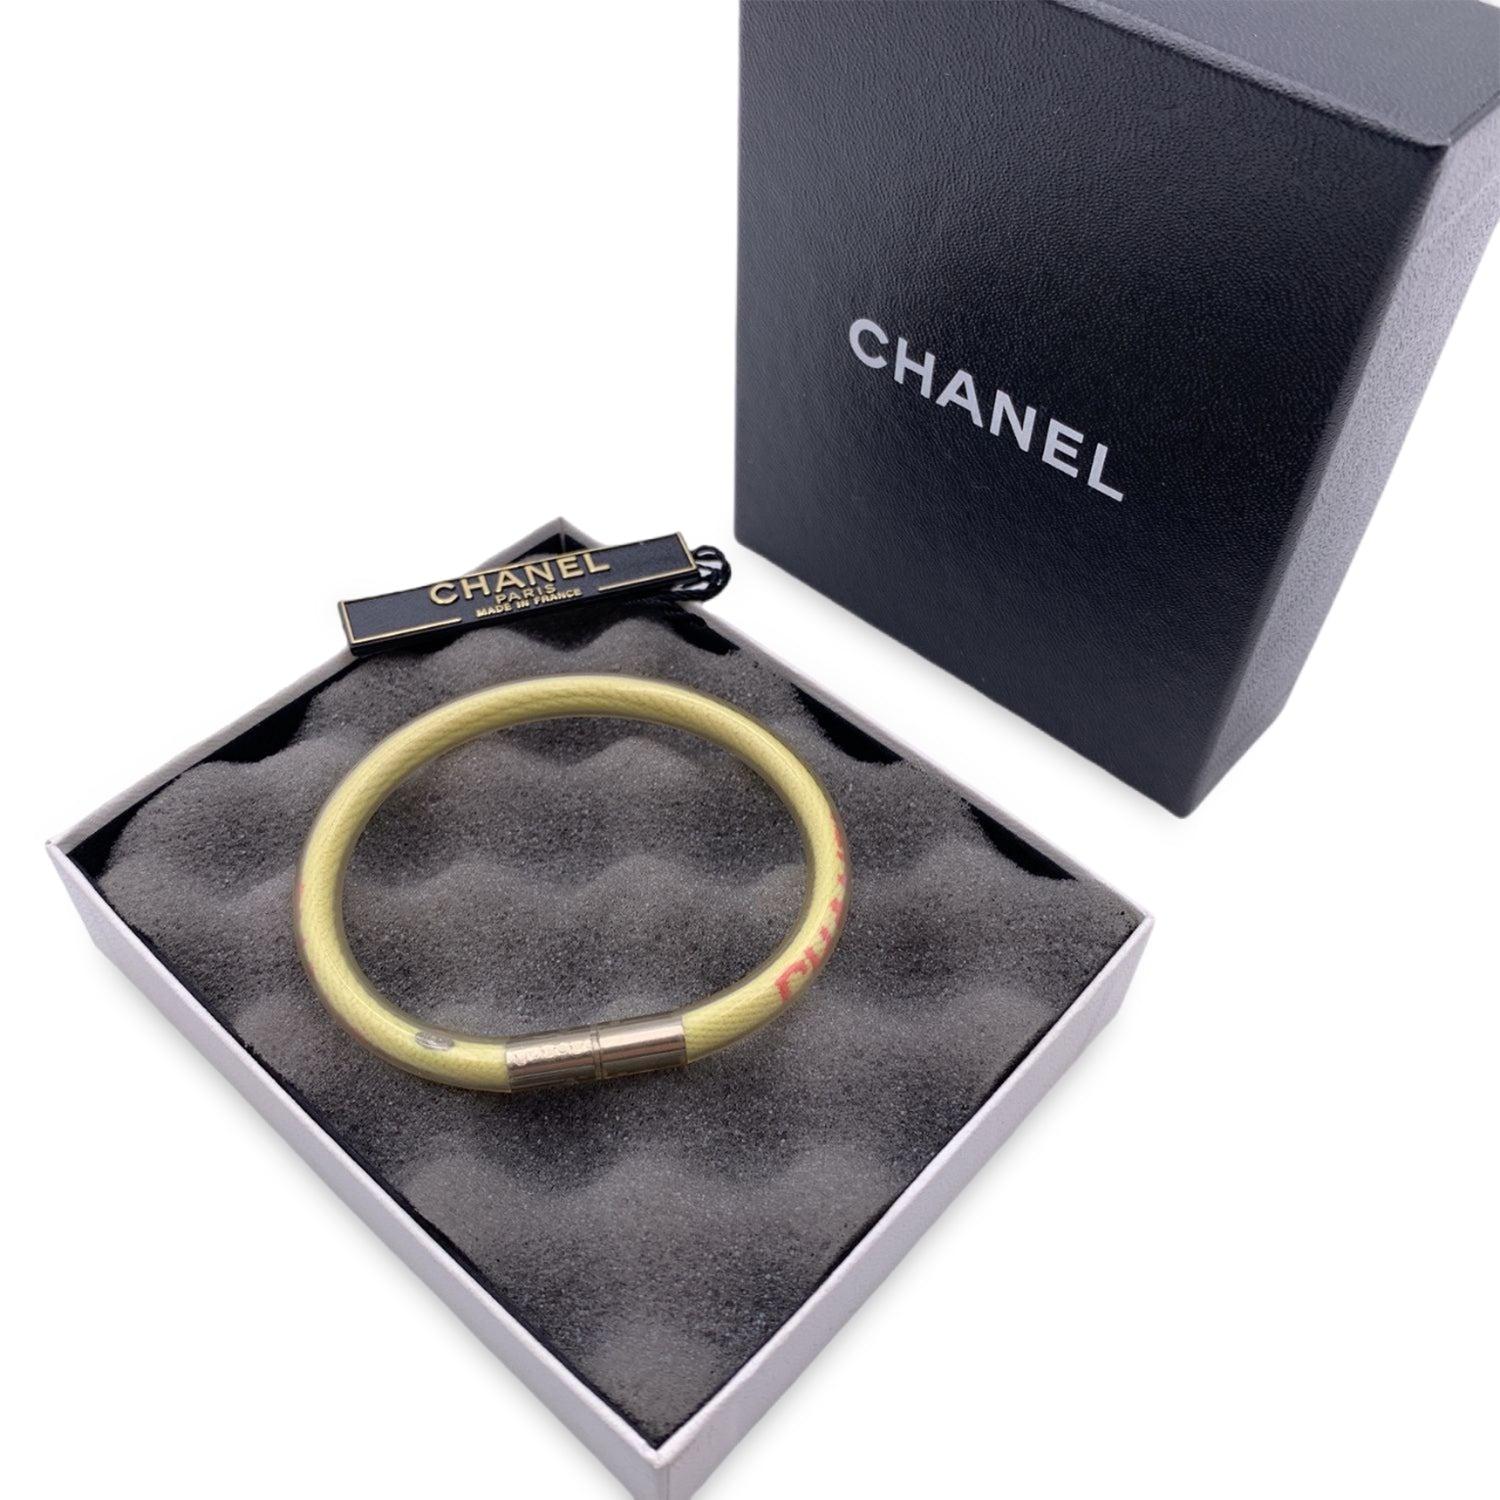 Lovely bracelet by CHANEL, crafted of pale yellow woven and clear vinyl tube. Pink CHANEL signature. Secured with a silver tone twist lock. 'Chanel 00 CC T Made in France' oval hallmark near the closure. Internal circumference: 6.5 inches - 16.5 cm